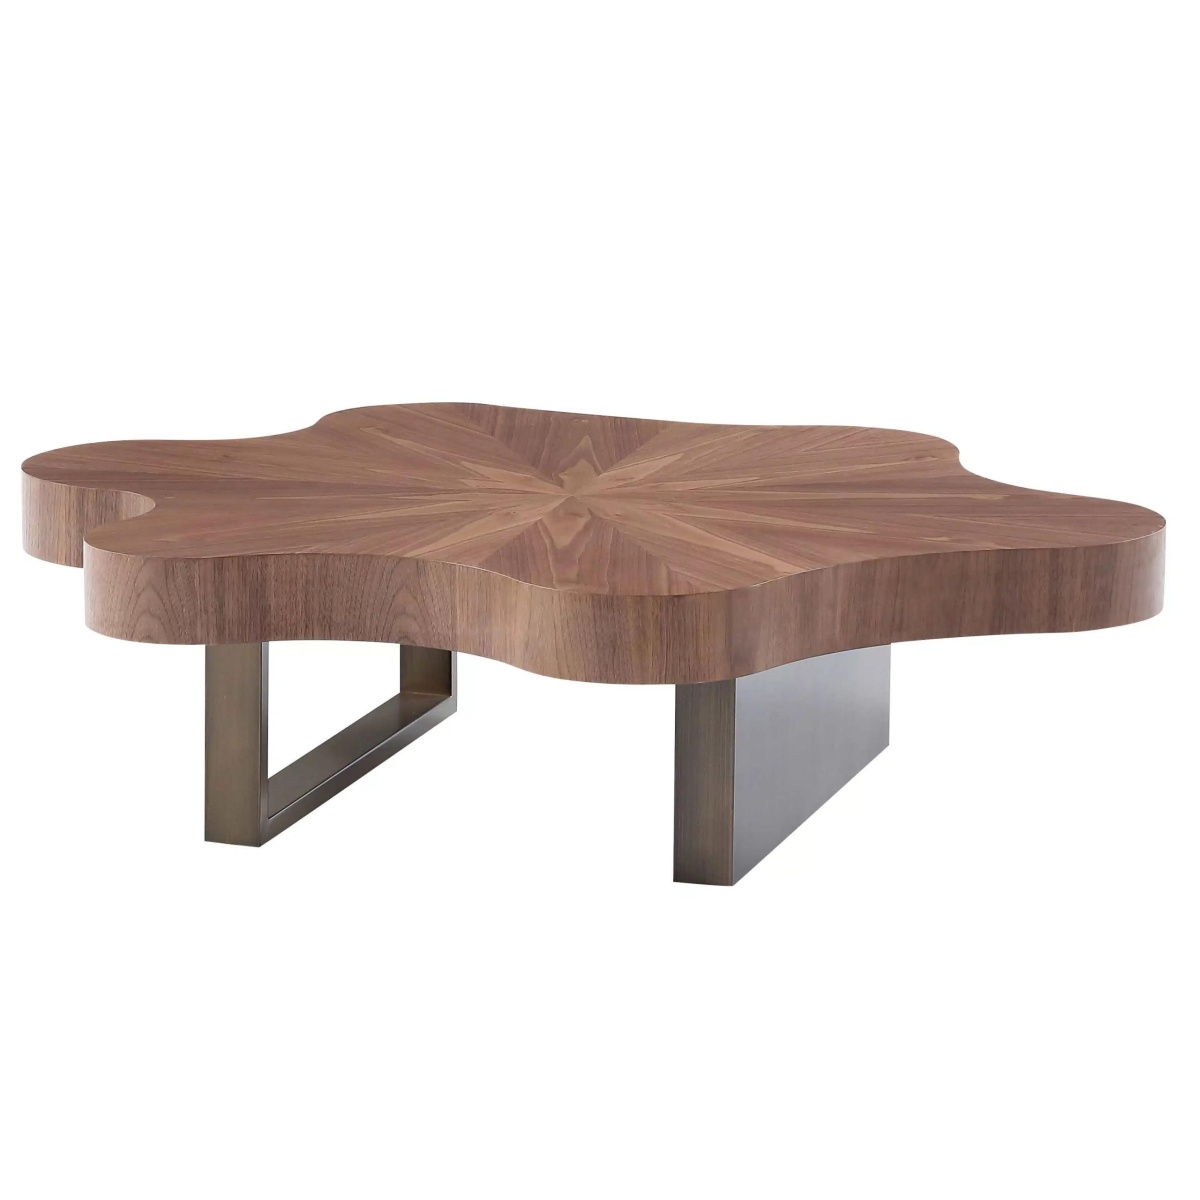 WoodFX woodefurniture Modern Cloud Wooden Coffee Table, 3-Part Unique Irregular shape, 72 * 36 * 16 inch